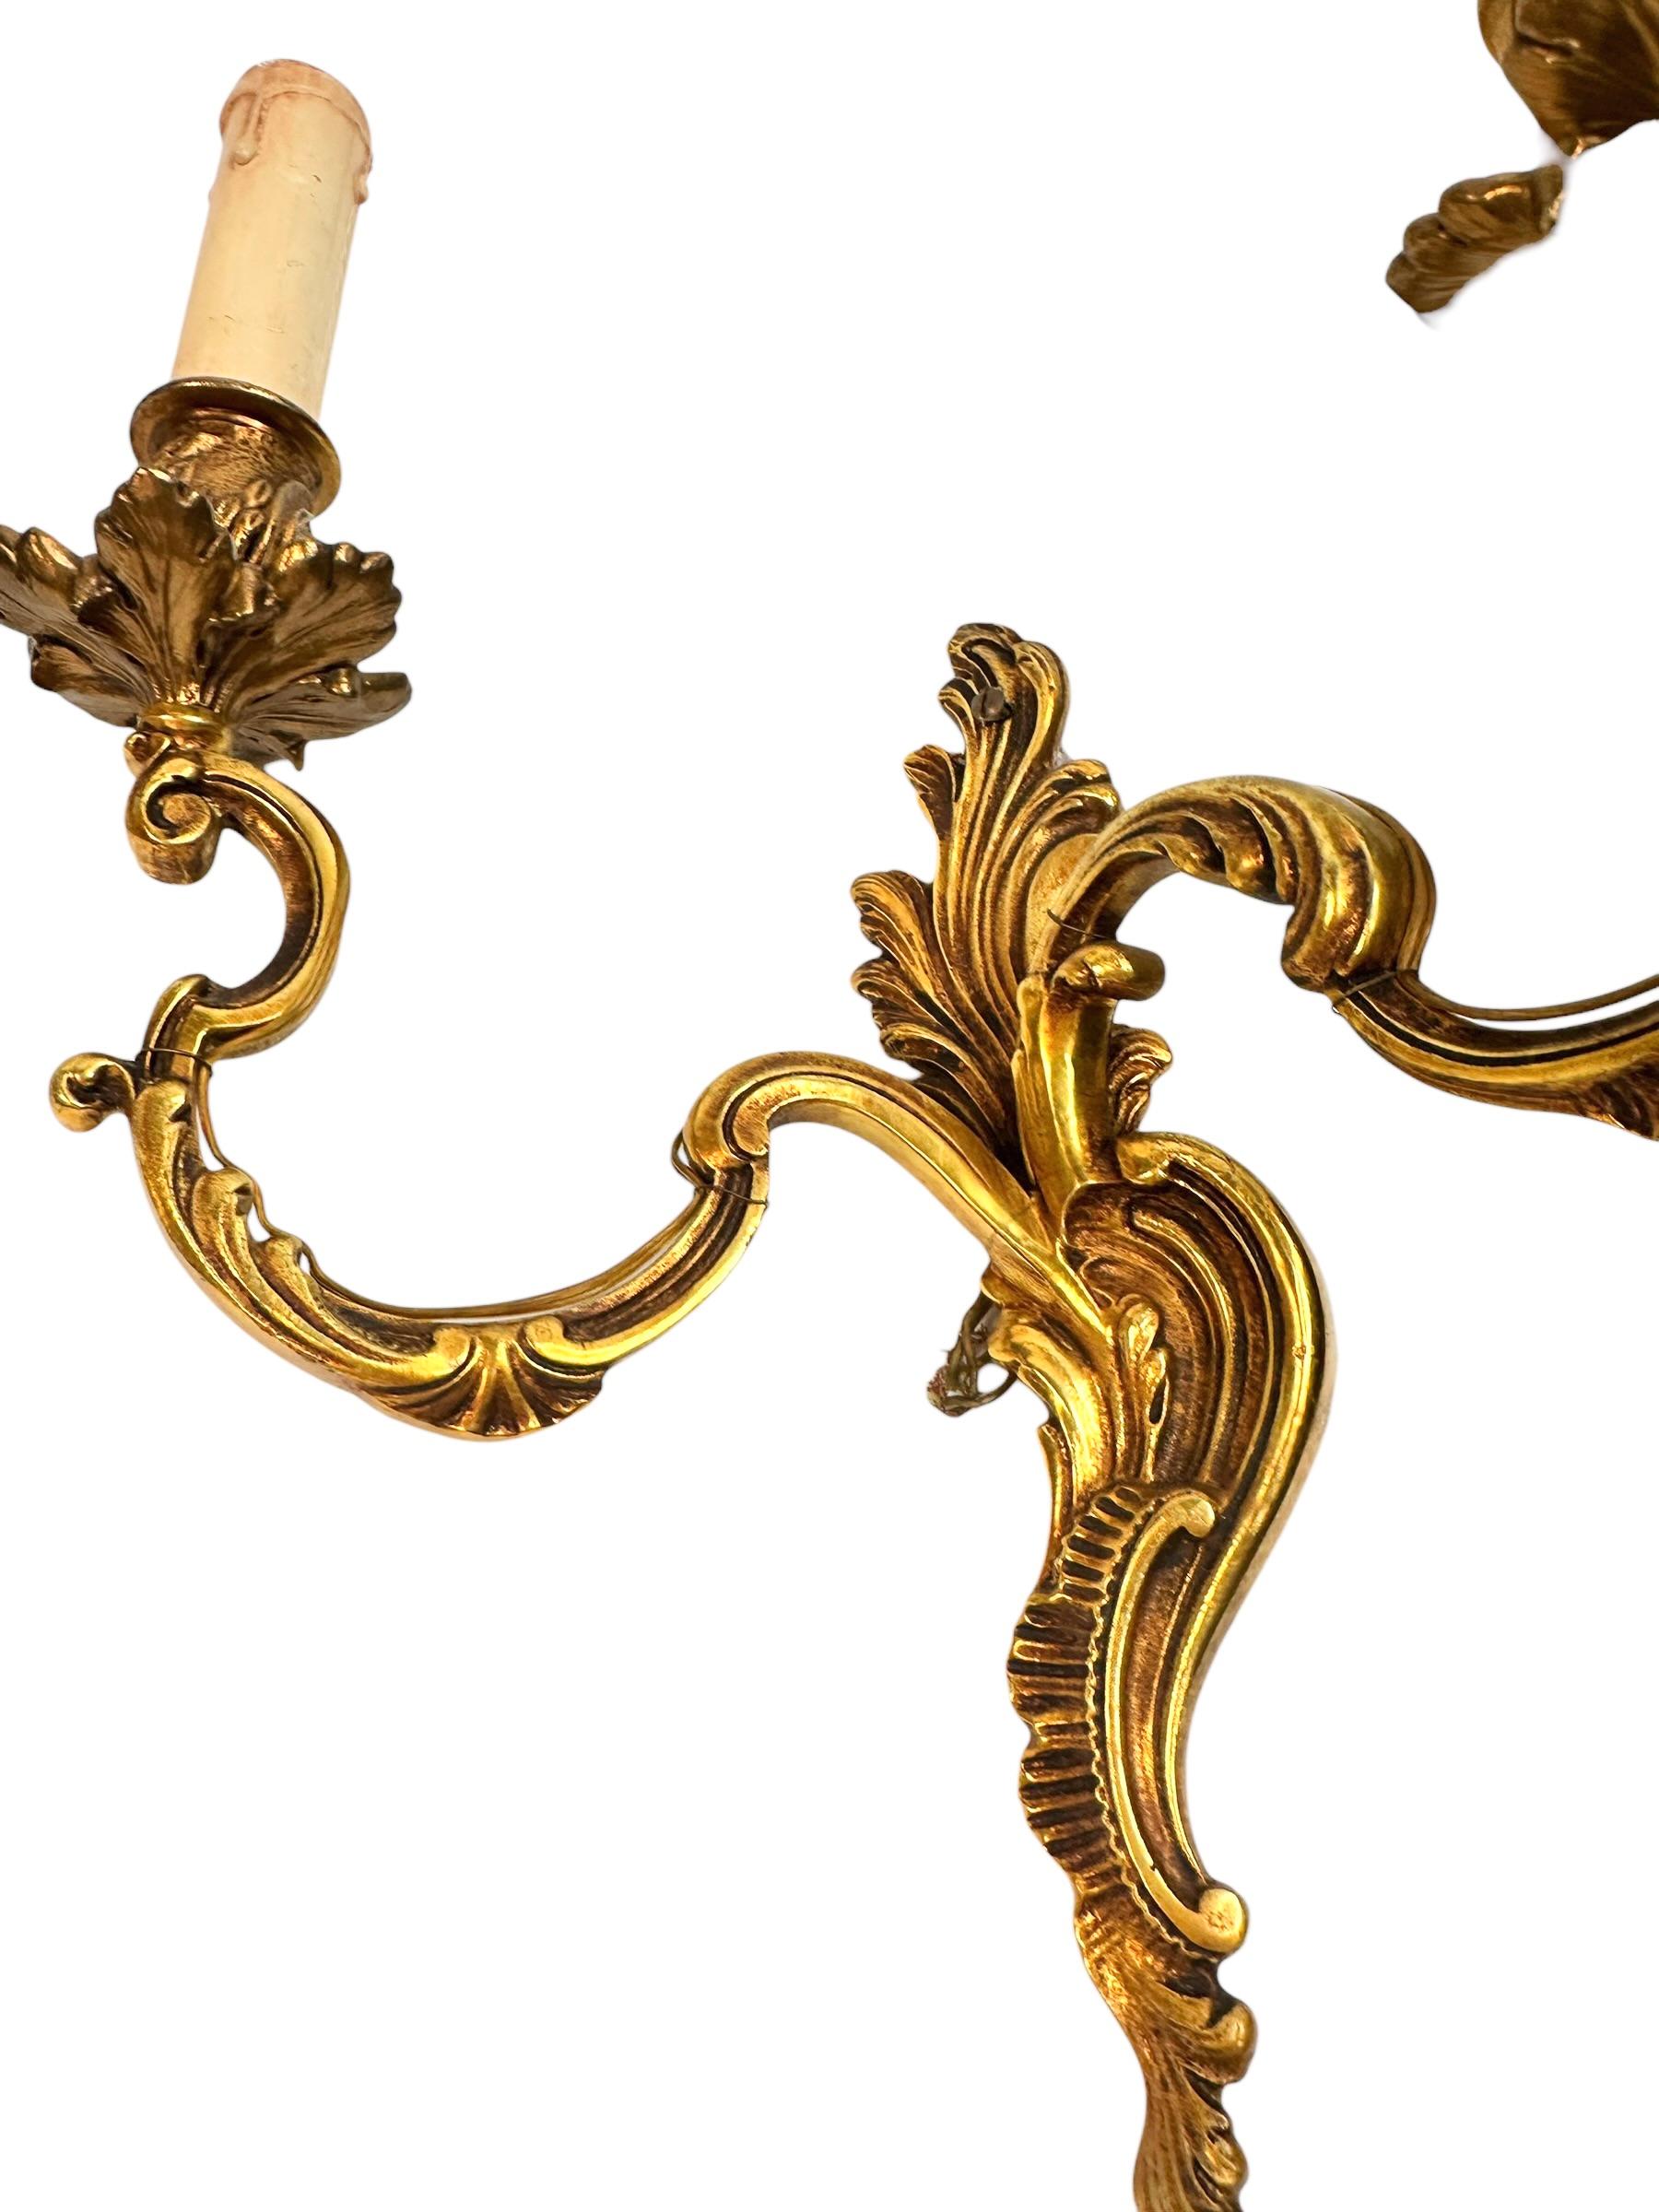 Mid-20th Century Pair of two Arm Rococo Style Wall Sconces in Bronze Italy, 1950s For Sale